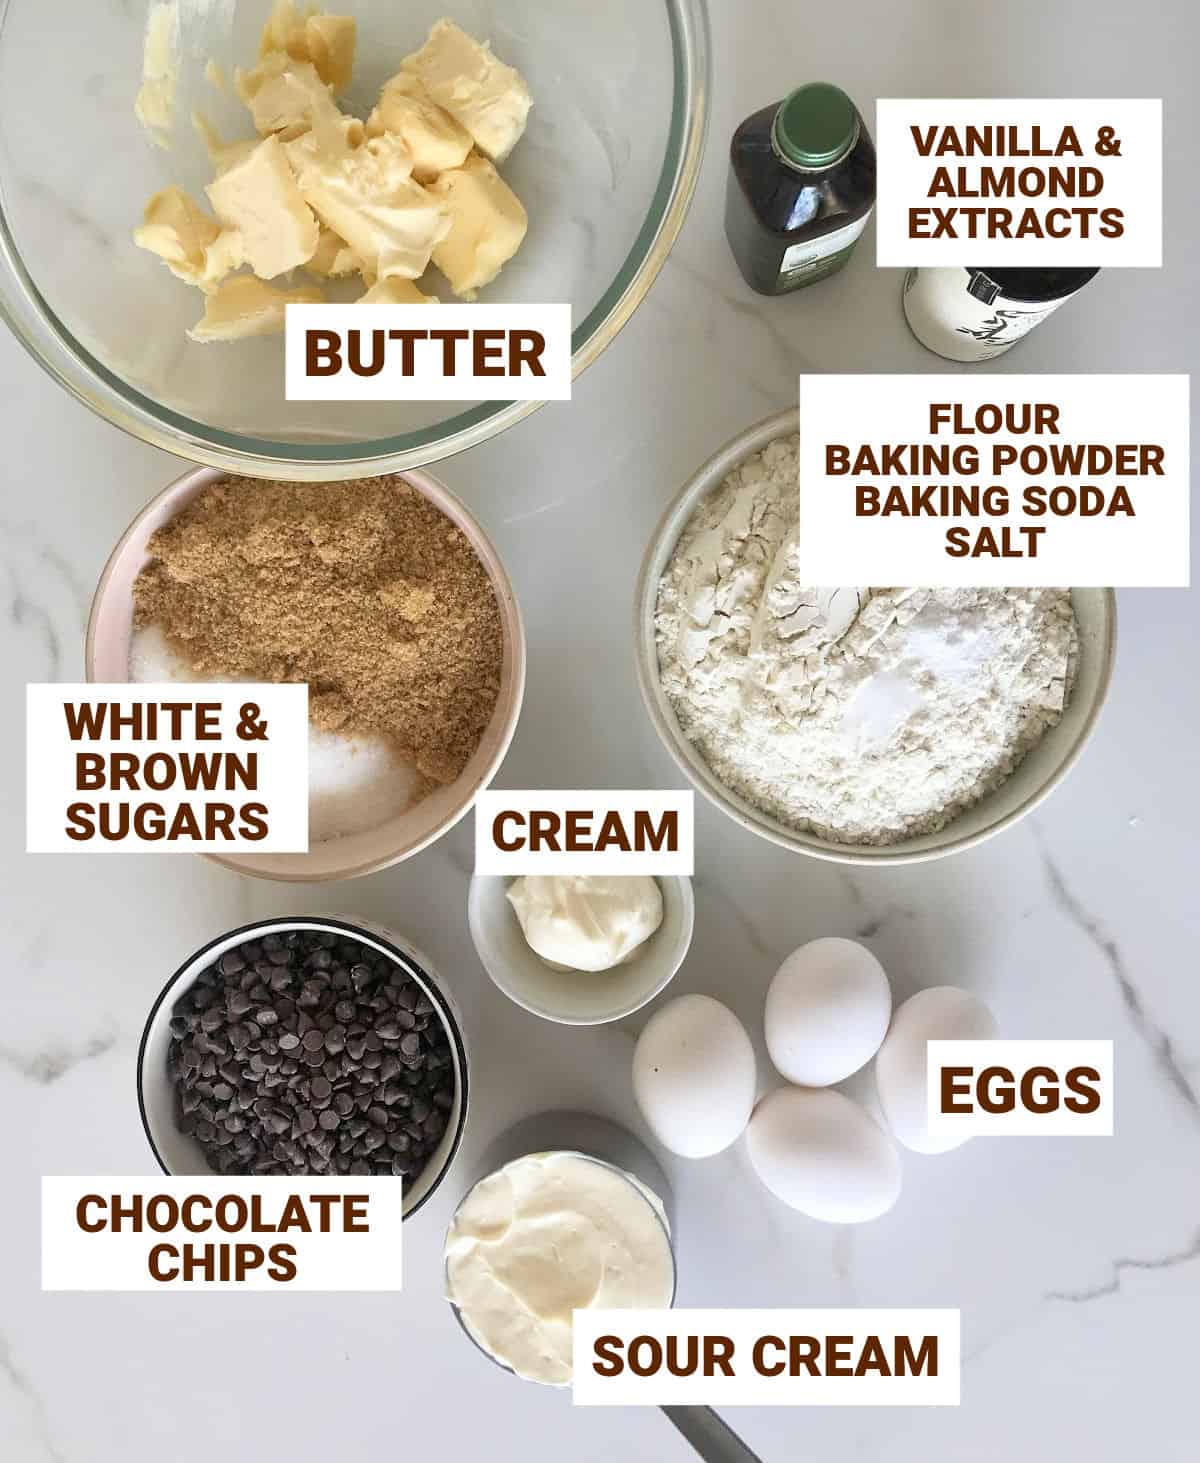 Bowls on white marble surface with ingredients for chocolate chip cake including butter, sugars, flour, eggs, extracts, sour cream